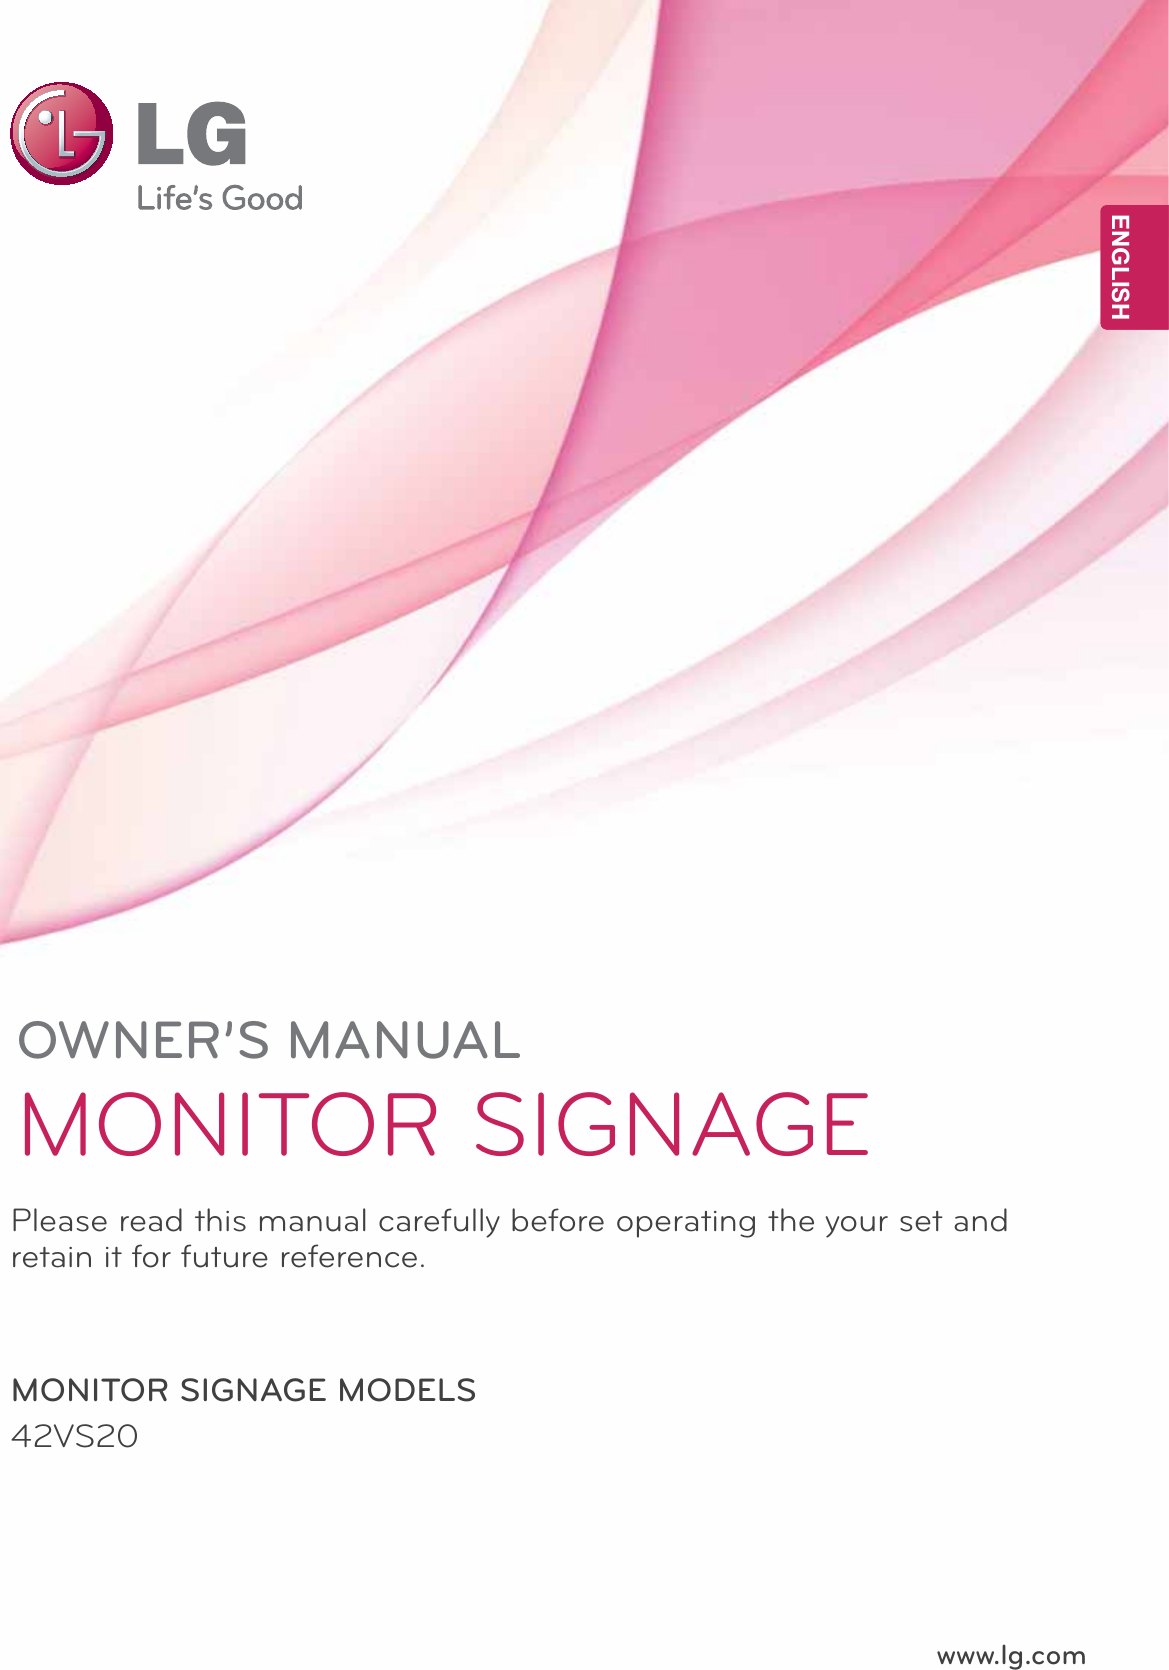 www.lg.comOWNER’S MANUALMONITOR SIGNAGE 42VS20Please read this manual carefully before operating the your set and retain it for future reference.MONITOR SIGNAGE MODELSENGENGLISH